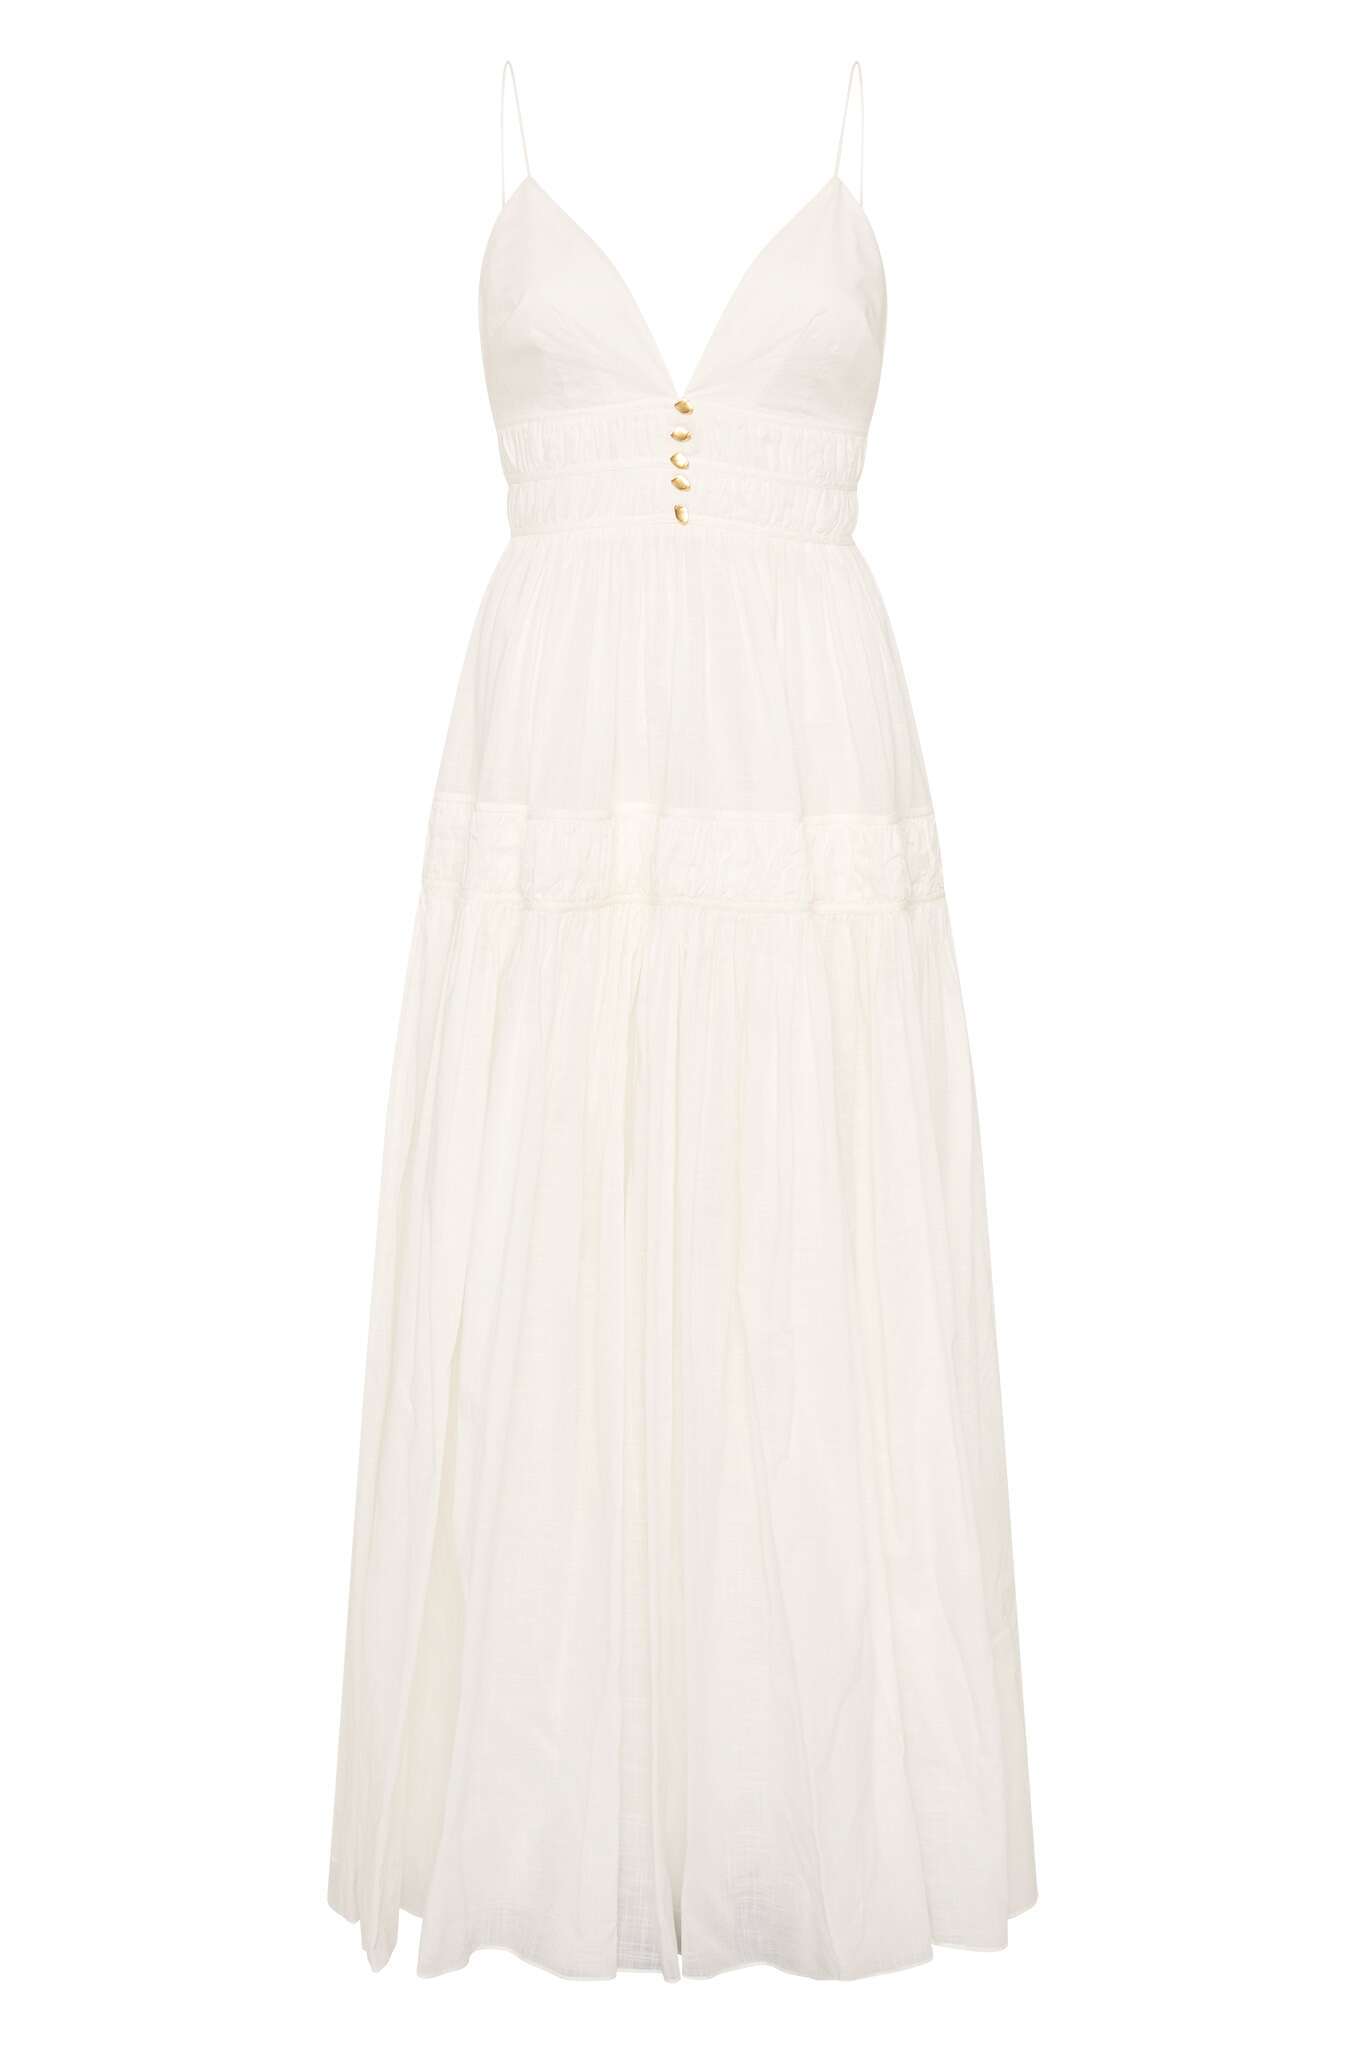 The white maxi dress from the Aje Vacation Edit